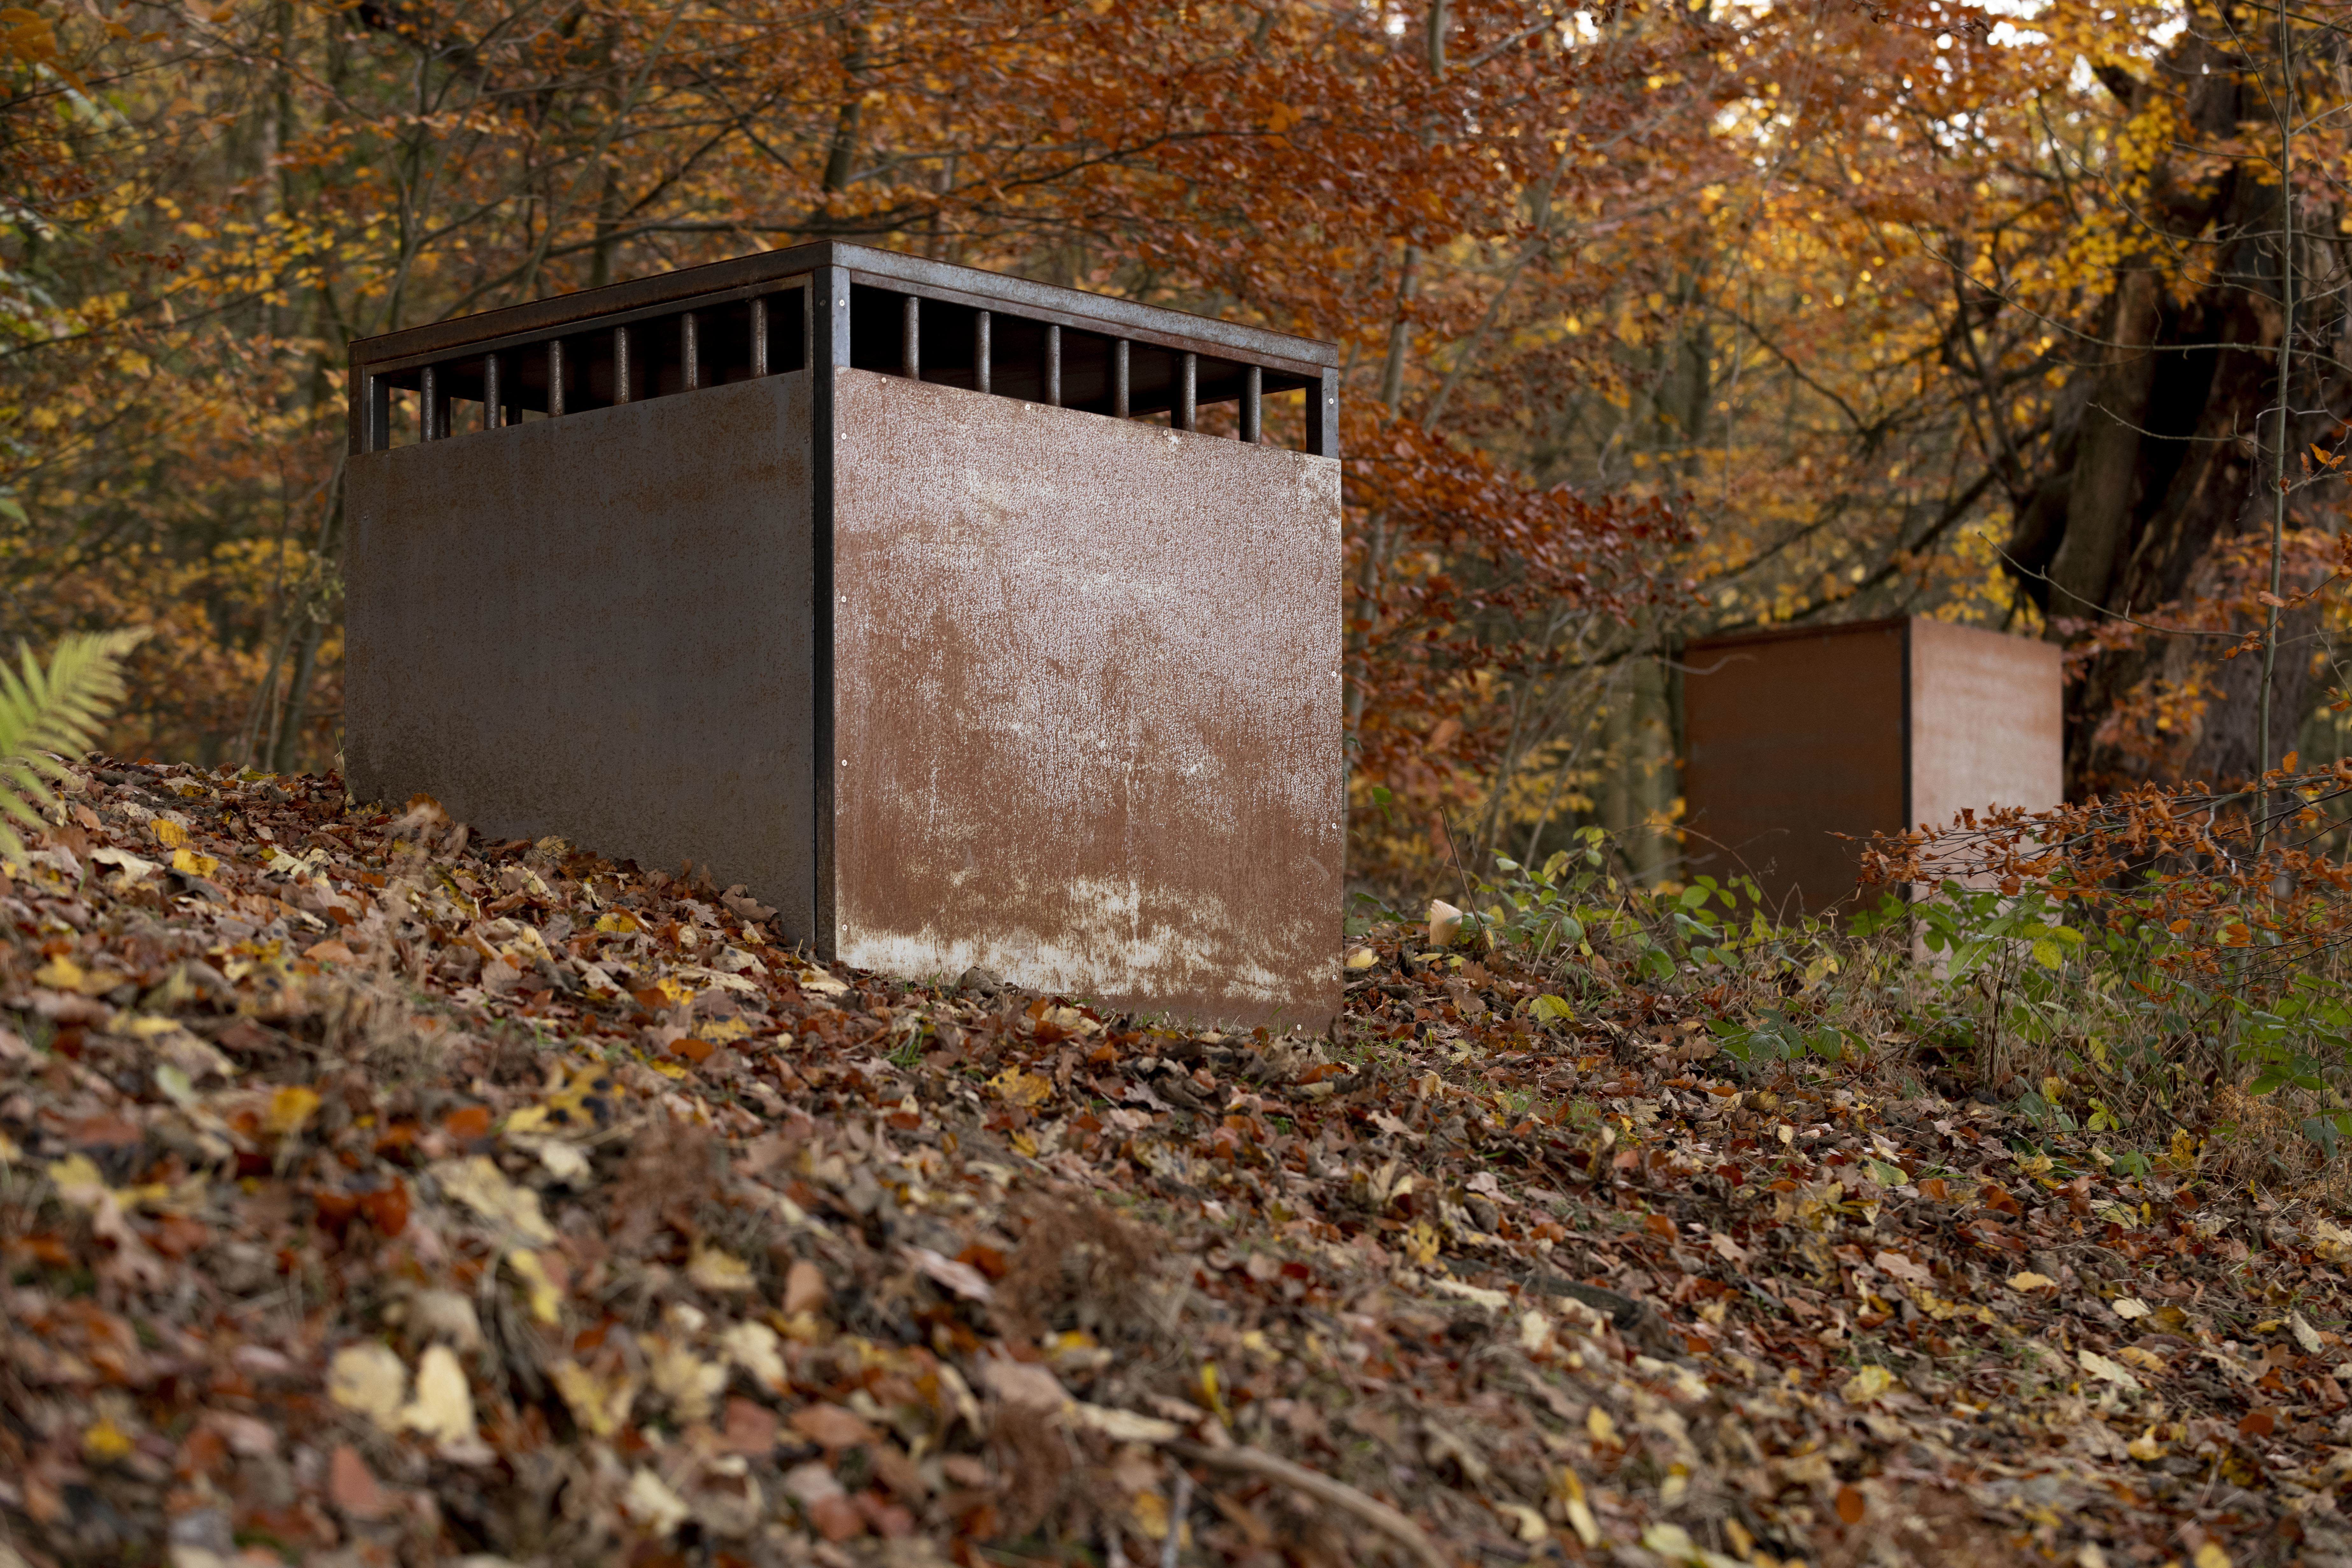 Two rusting steel cell sculptures surrounded by autumnal leaves.